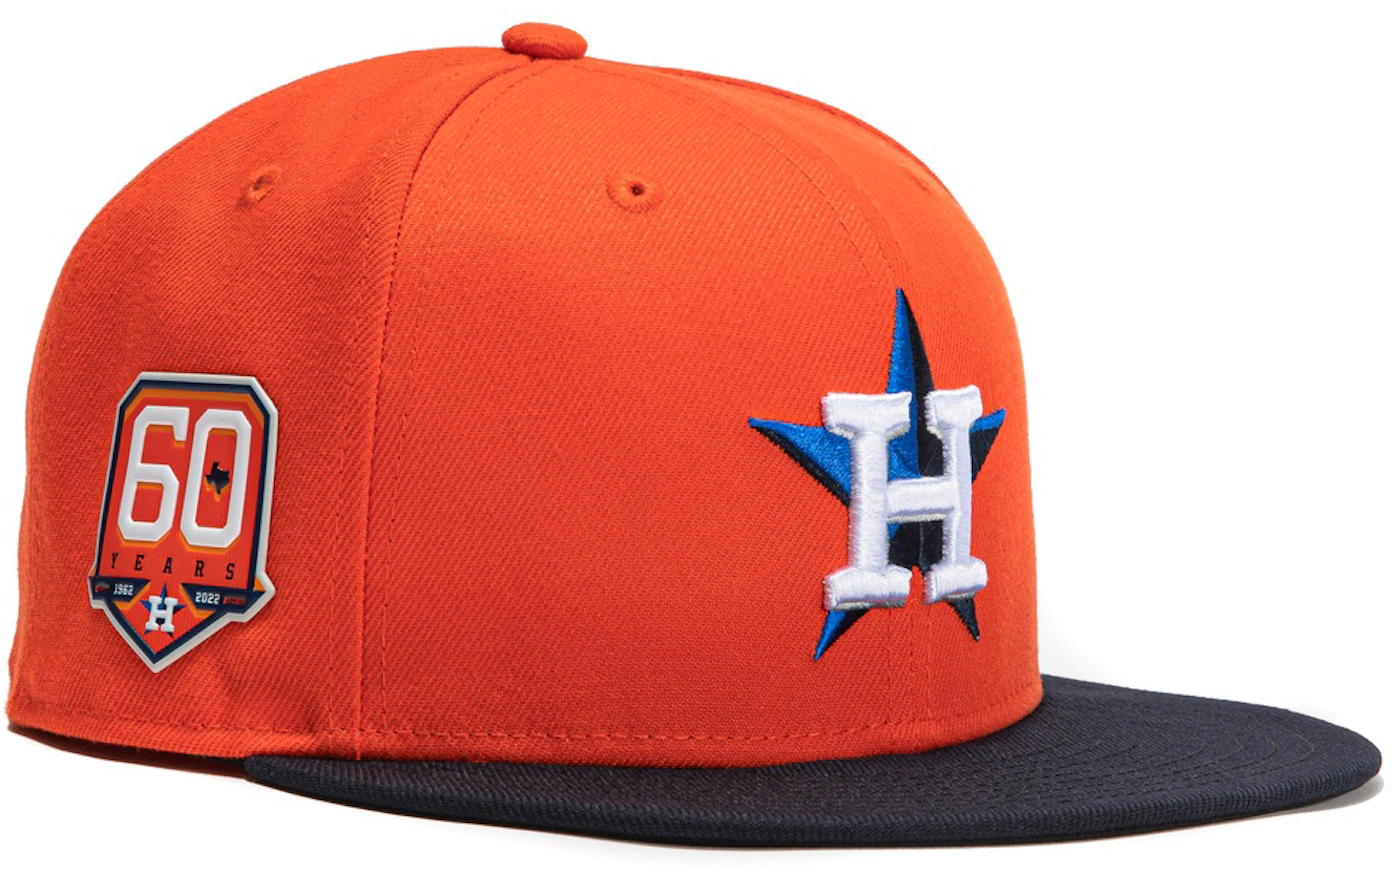 New Era Houston Astros 60th Anniversary Patch Alternate Hat Club Exclusive  59Fifty Fitted Hat Orange/Navy Men's - SS22 - US